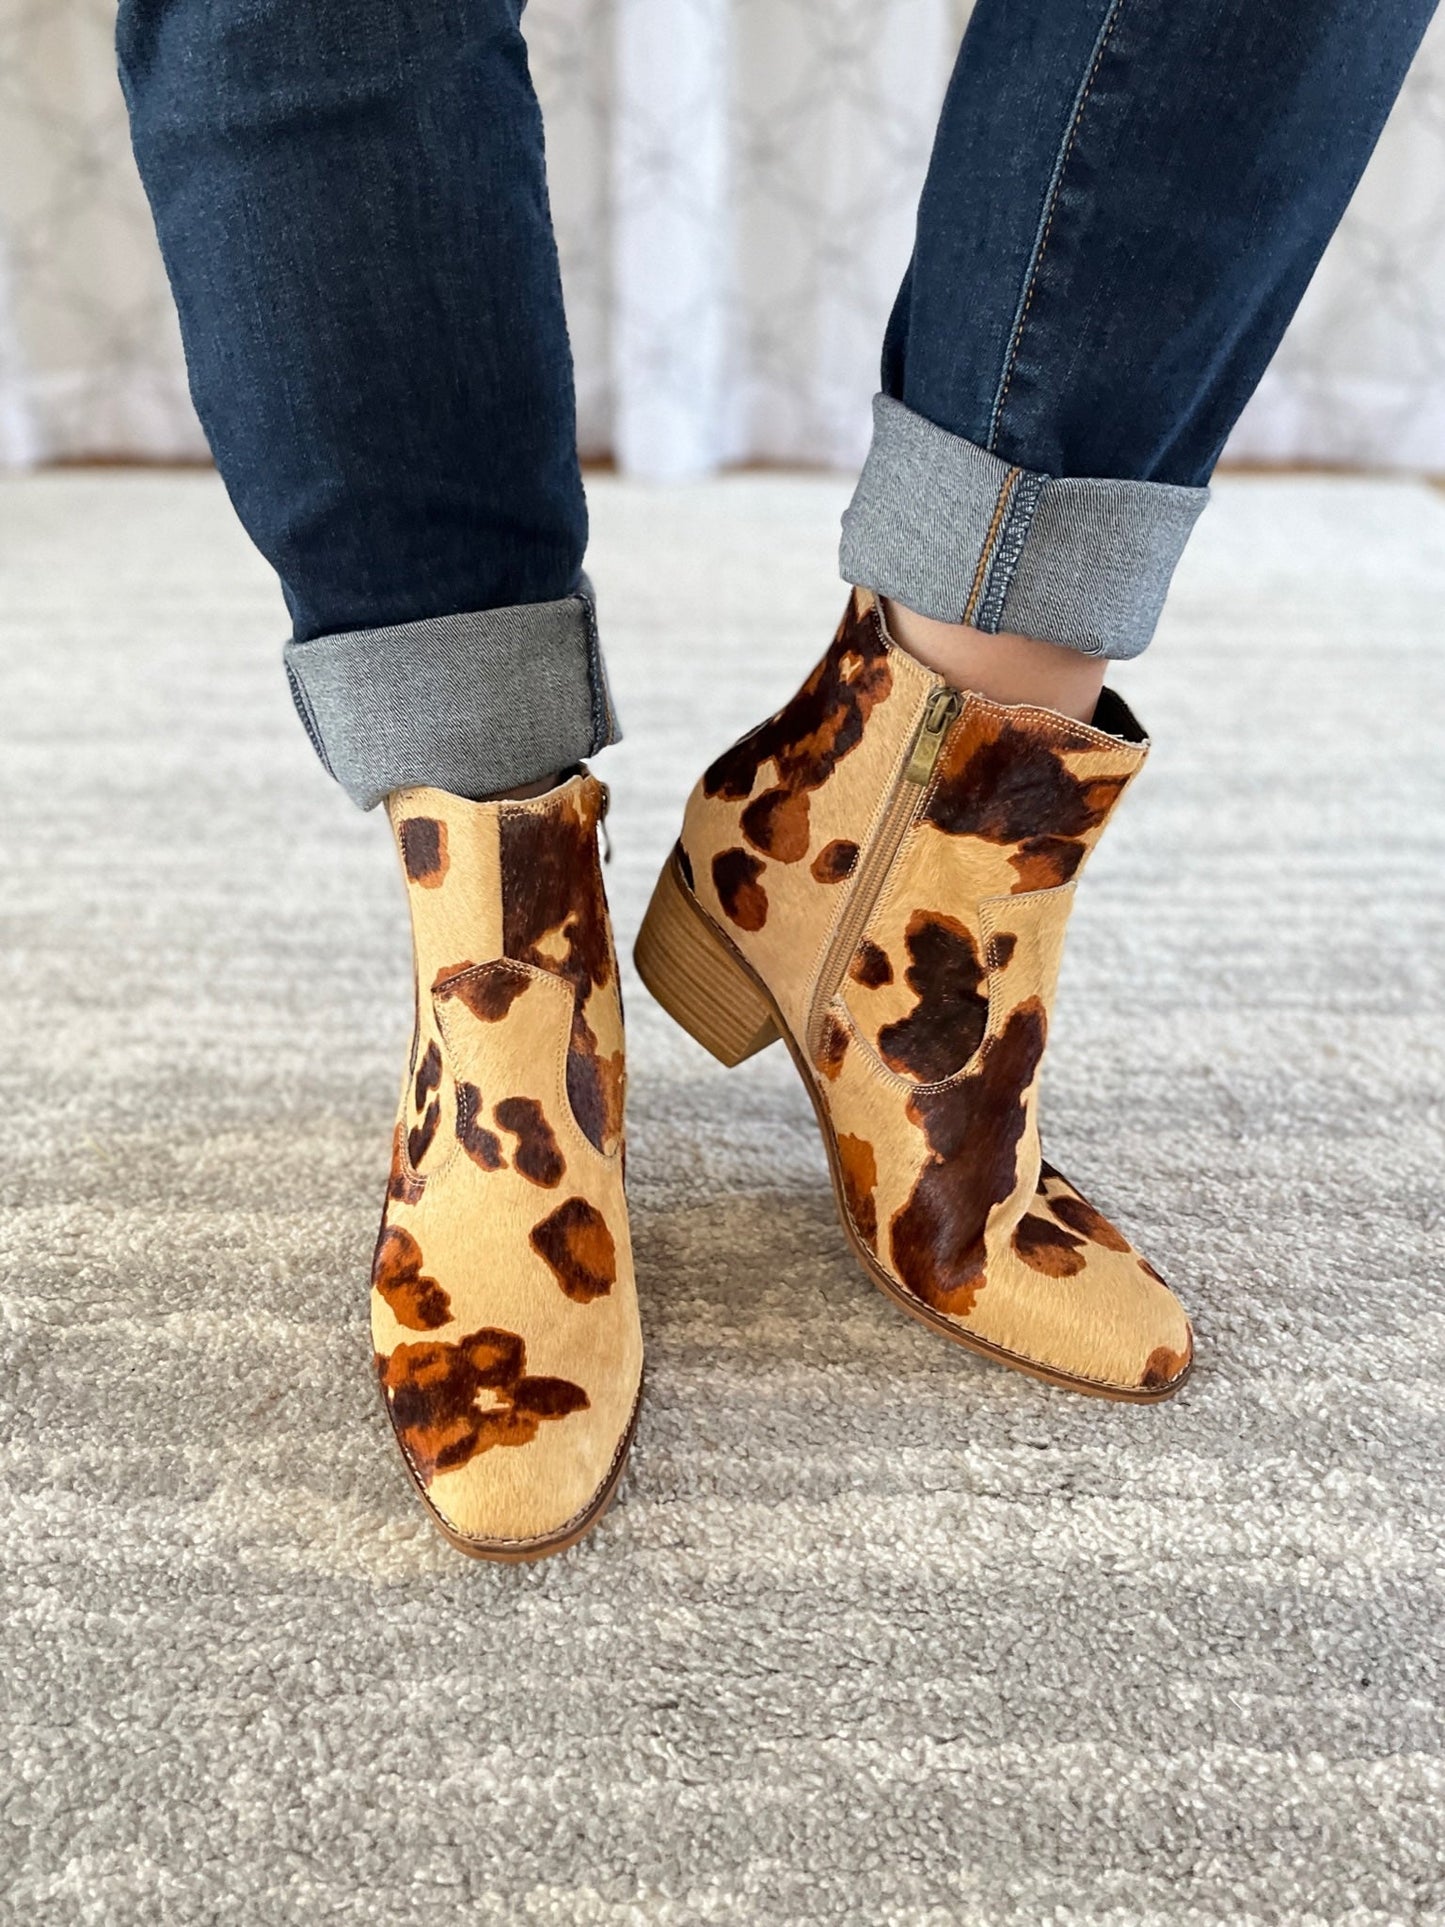 Corky's Charming Booties in Furred Leather